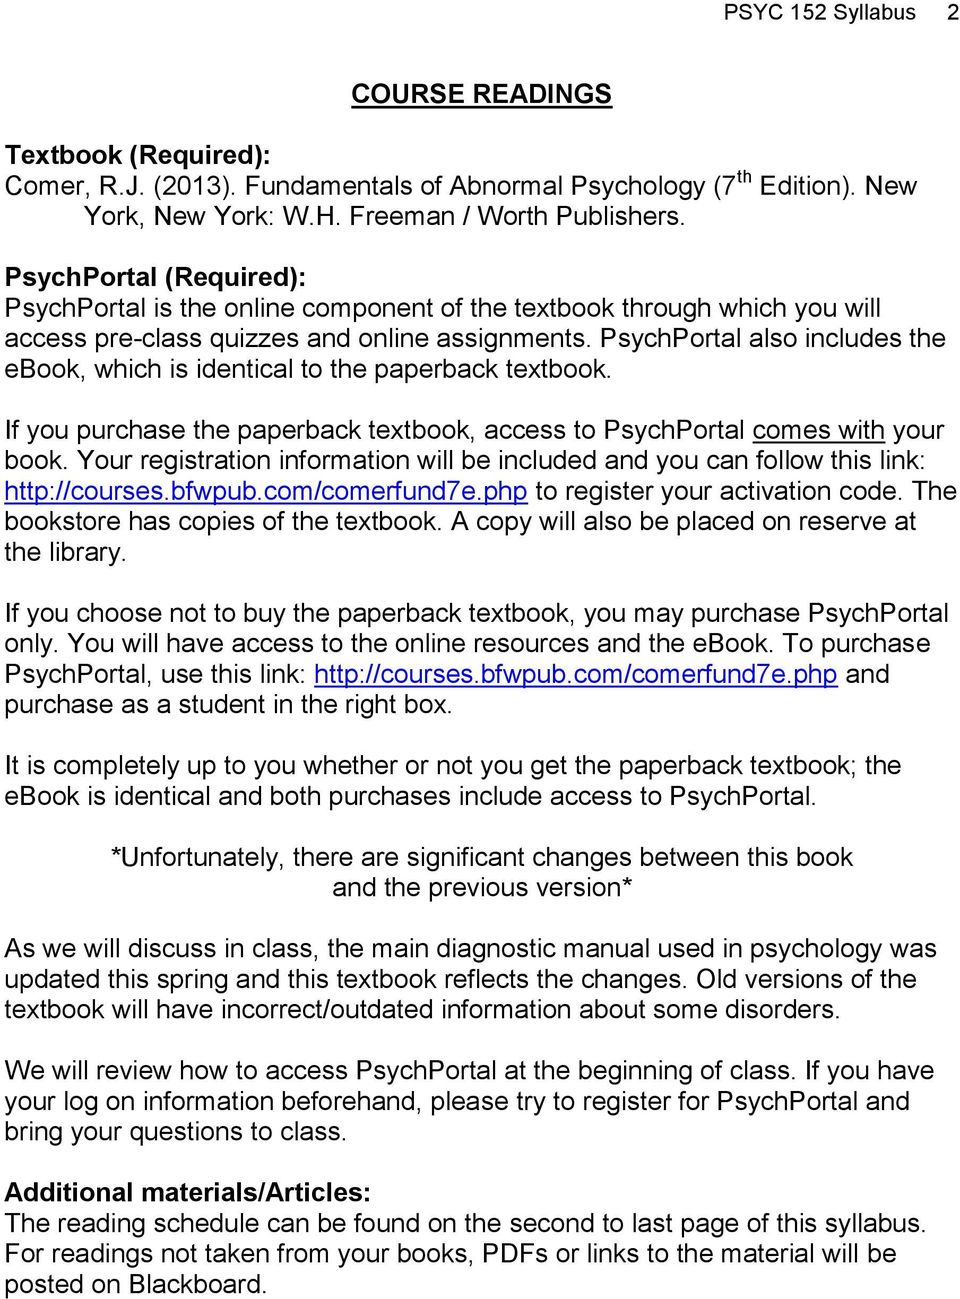 PsychPortal also includes the ebook, which is identical to the paperback textbook. If you purchase the paperback textbook, access to PsychPortal comes with your book.